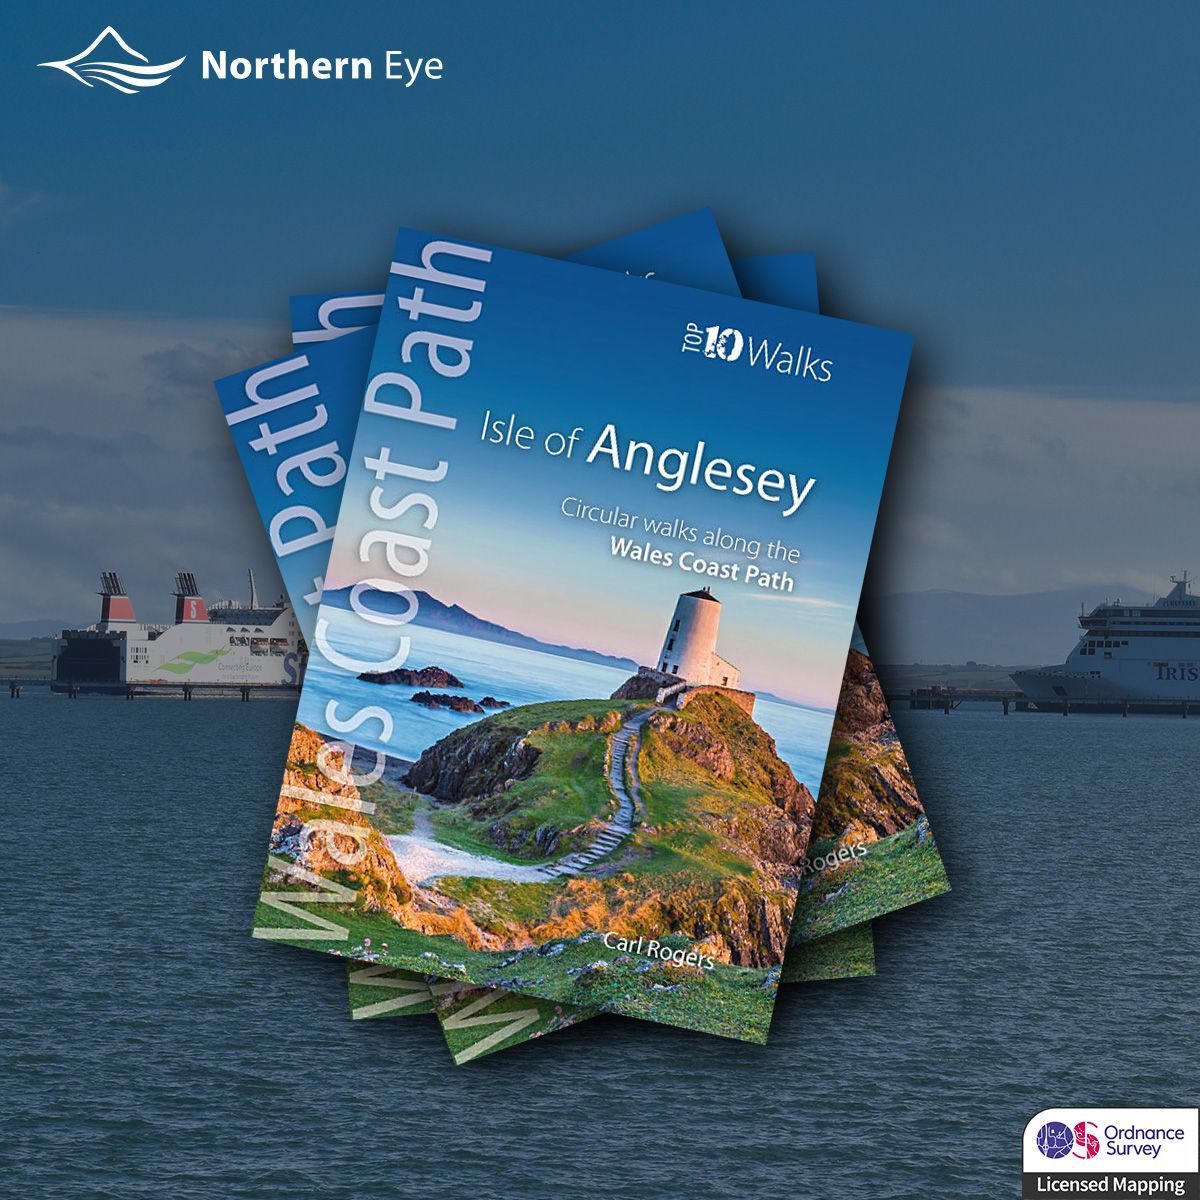 Discover ten of the very best circular walks on the Isle of Anglesey in this pocket-sized guidebook! Available at buff.ly/3n1bbsx & in local walking book stockists. #WalesCoastPath #LlwybrArfordirCymru #VisitWales #CroesoCymru #Cymru #Wales #DiscoverWales